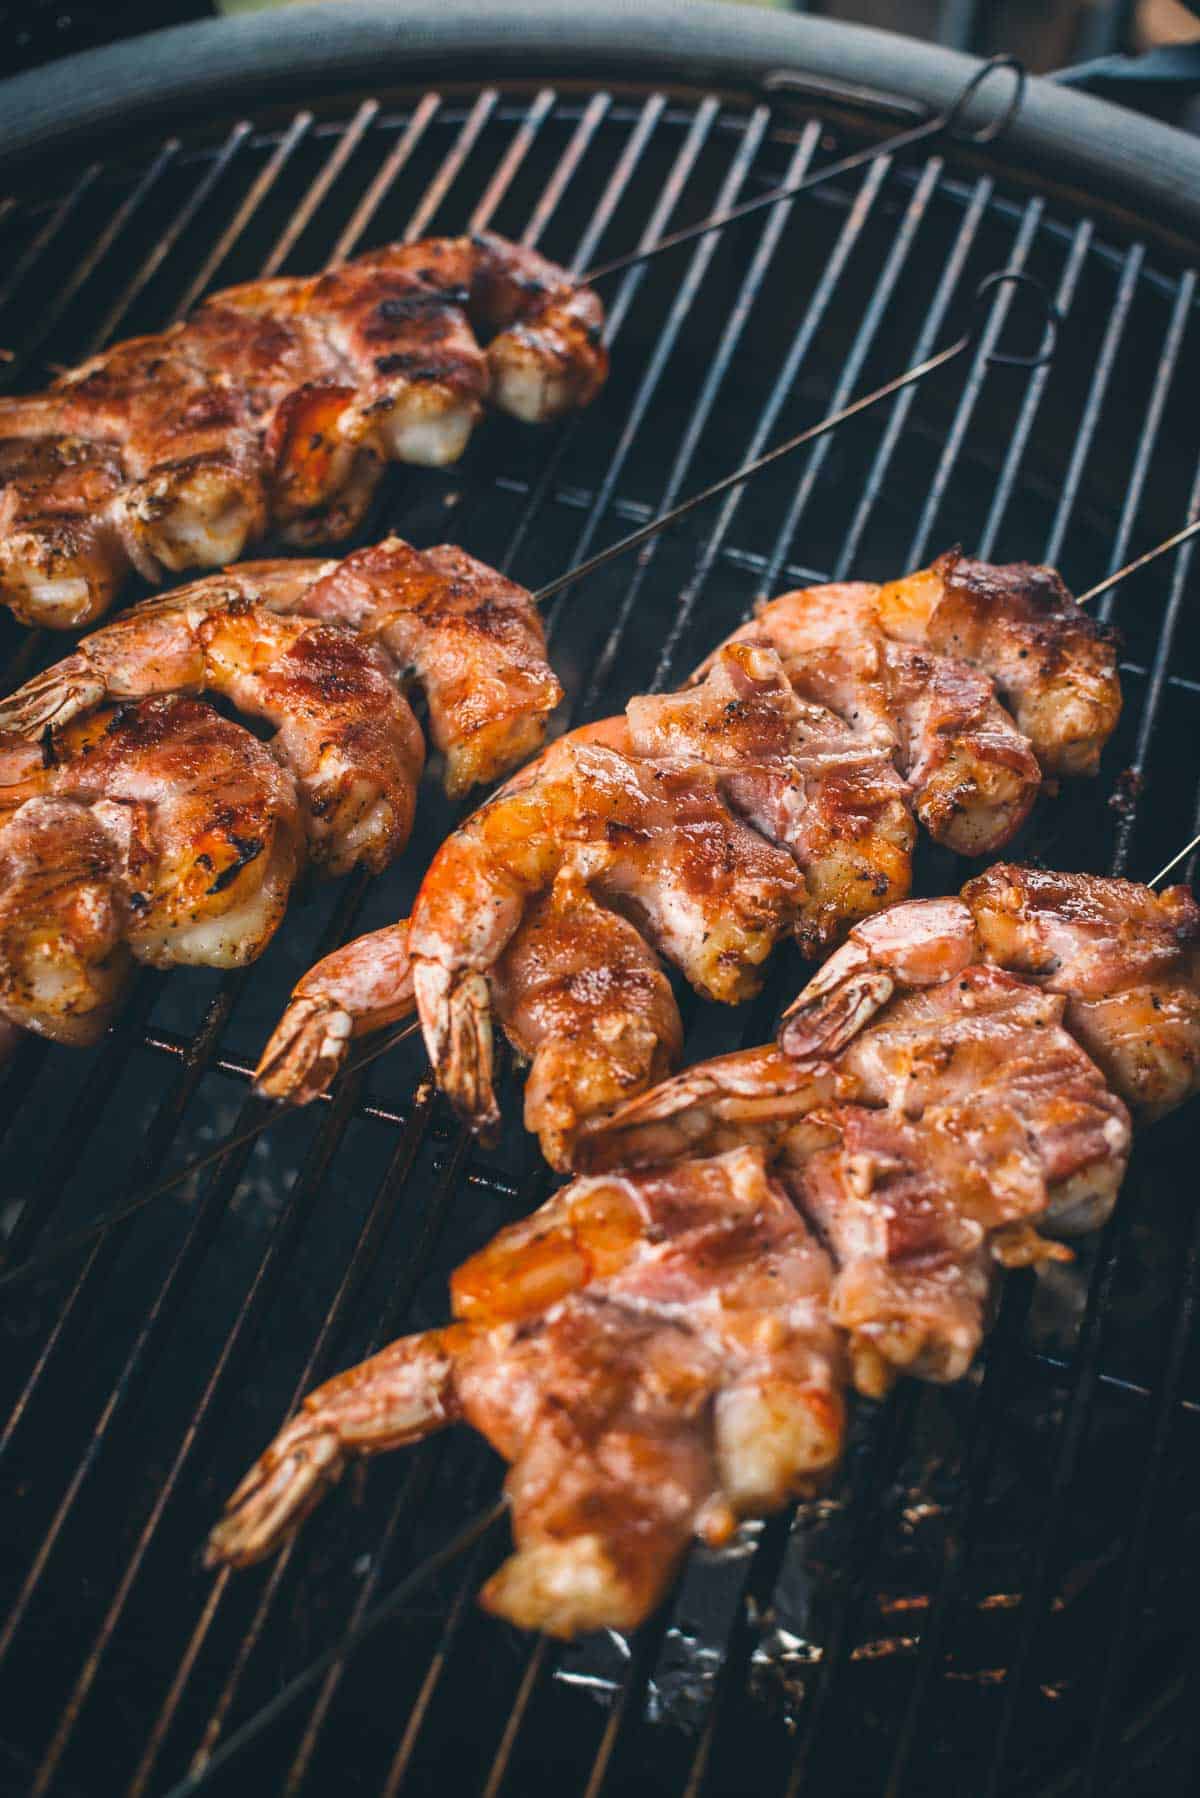 Four skewers of seasoned shrimp are being grilled over a charcoal grill.